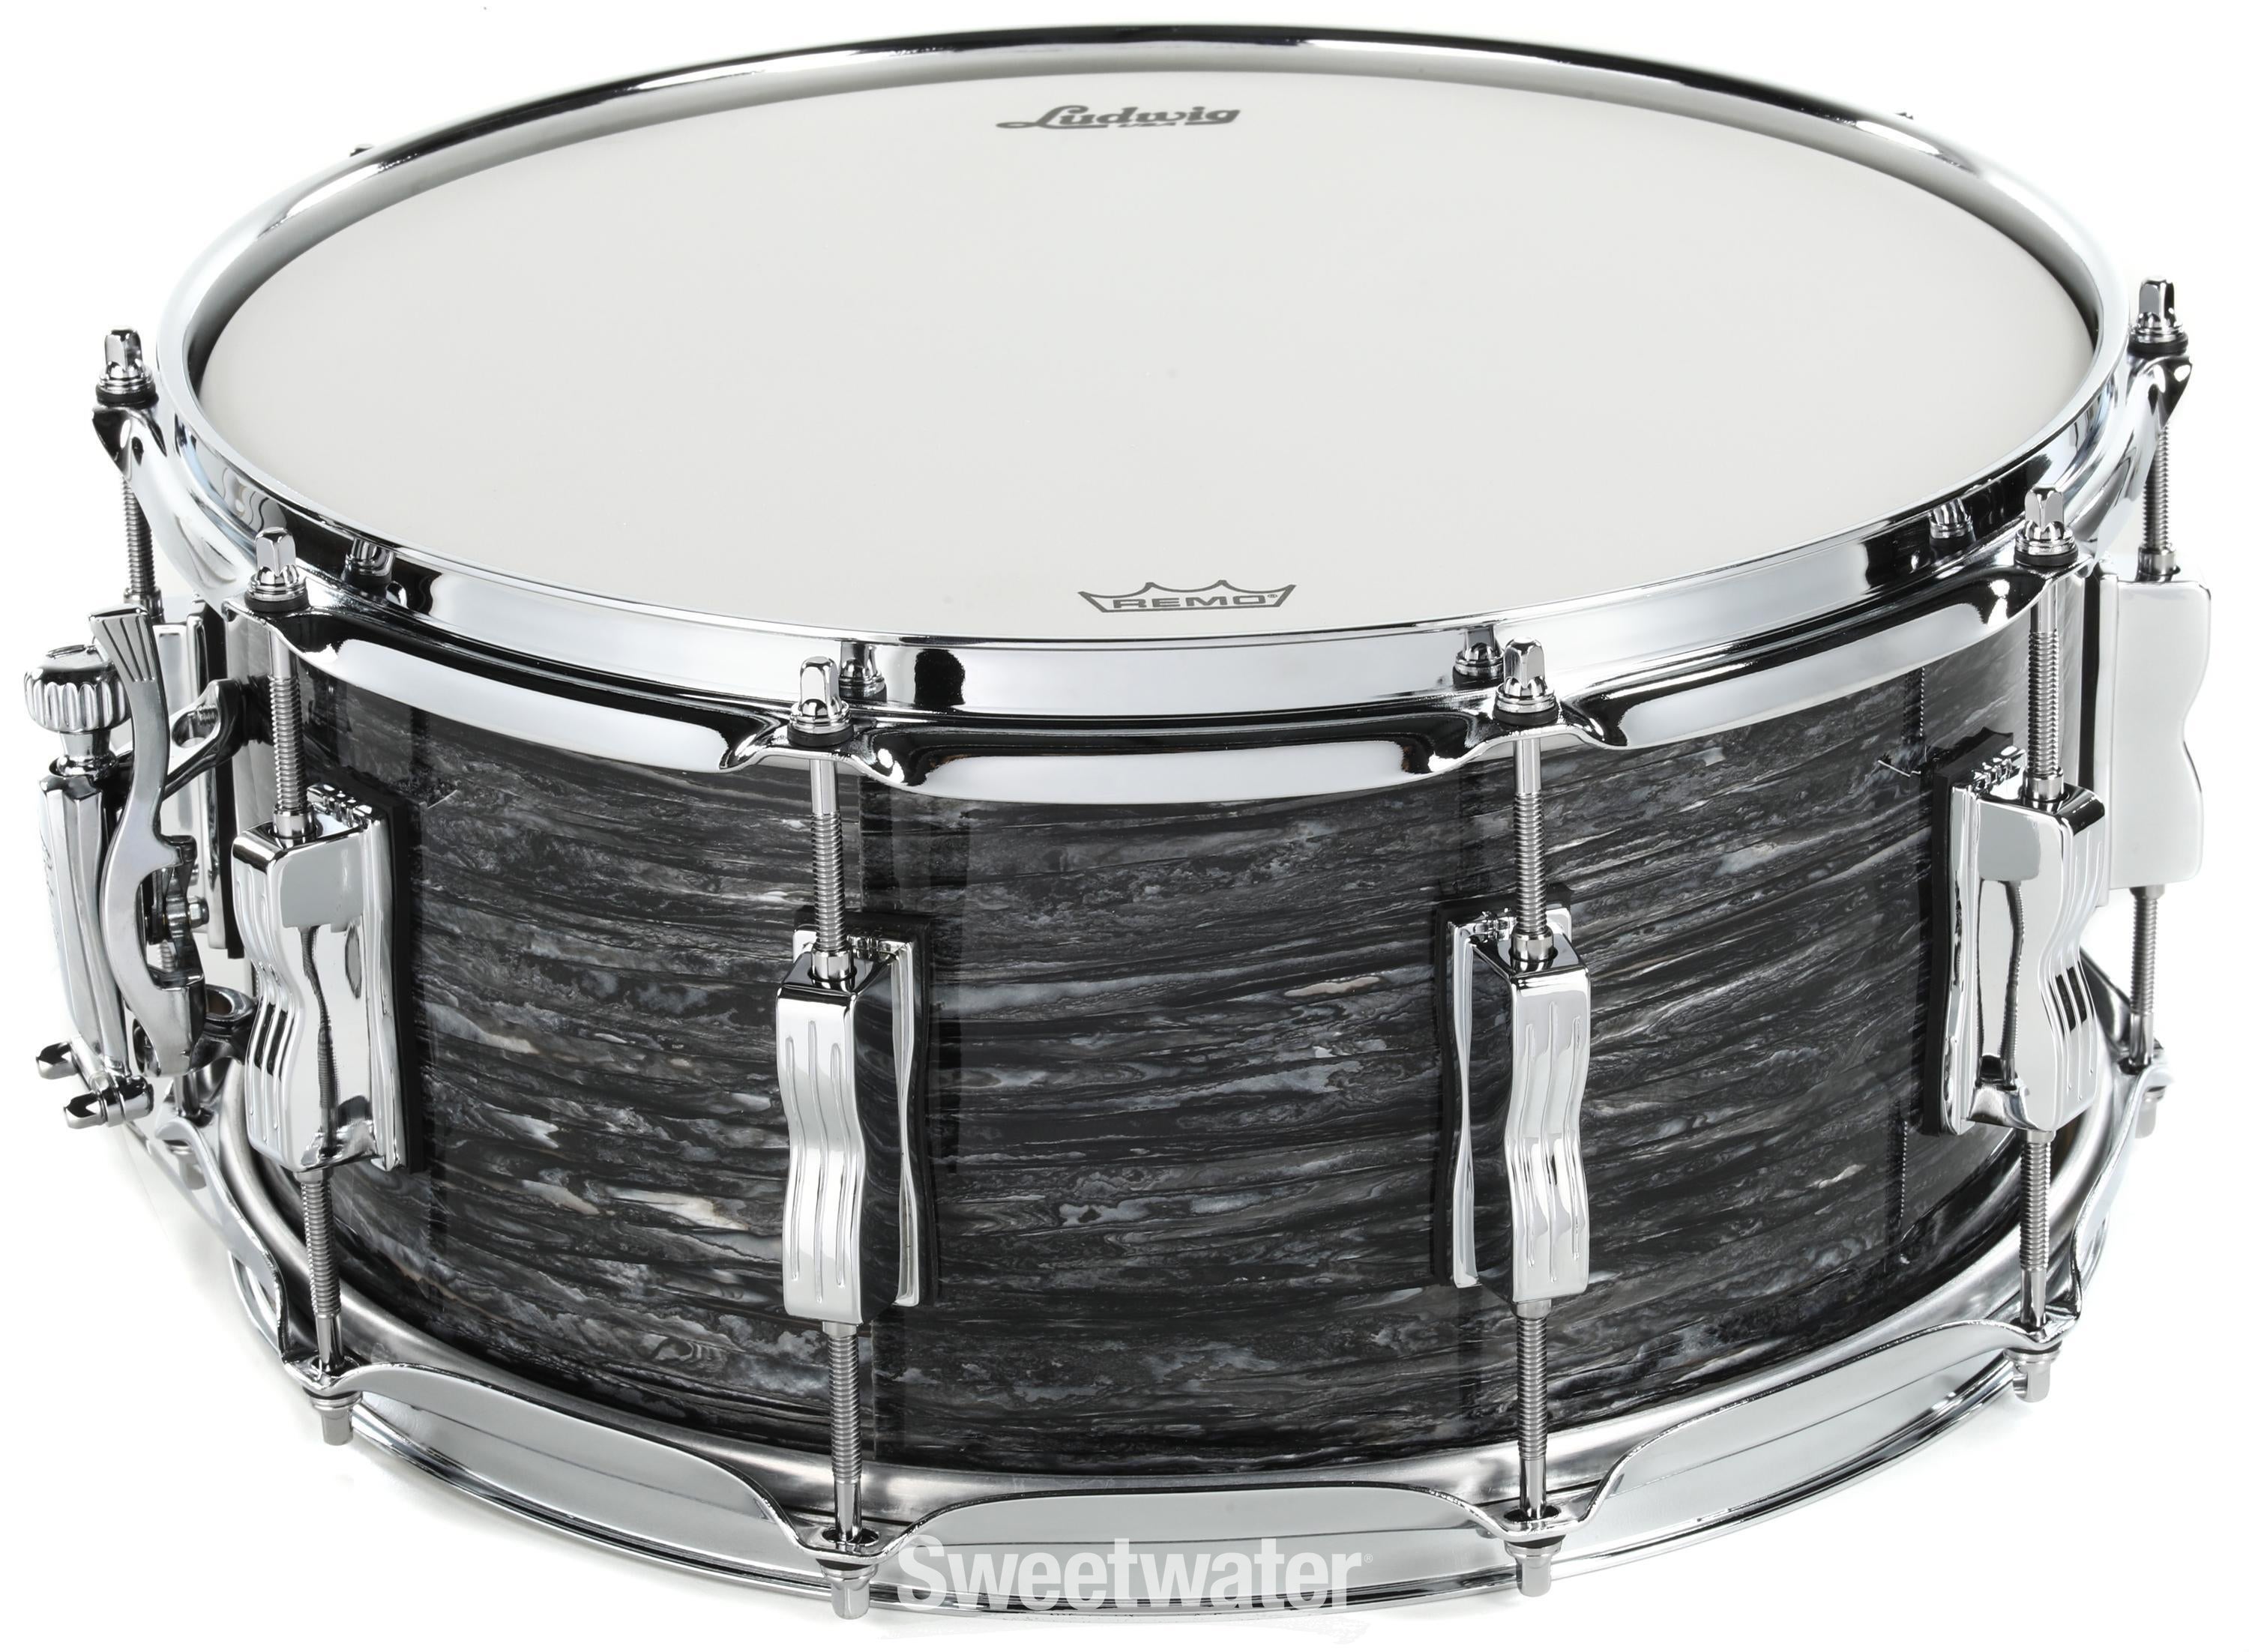 Ludwig Classic Maple Snare Drum - 6.5-inch x 14-inch - Vintage Black Oyster